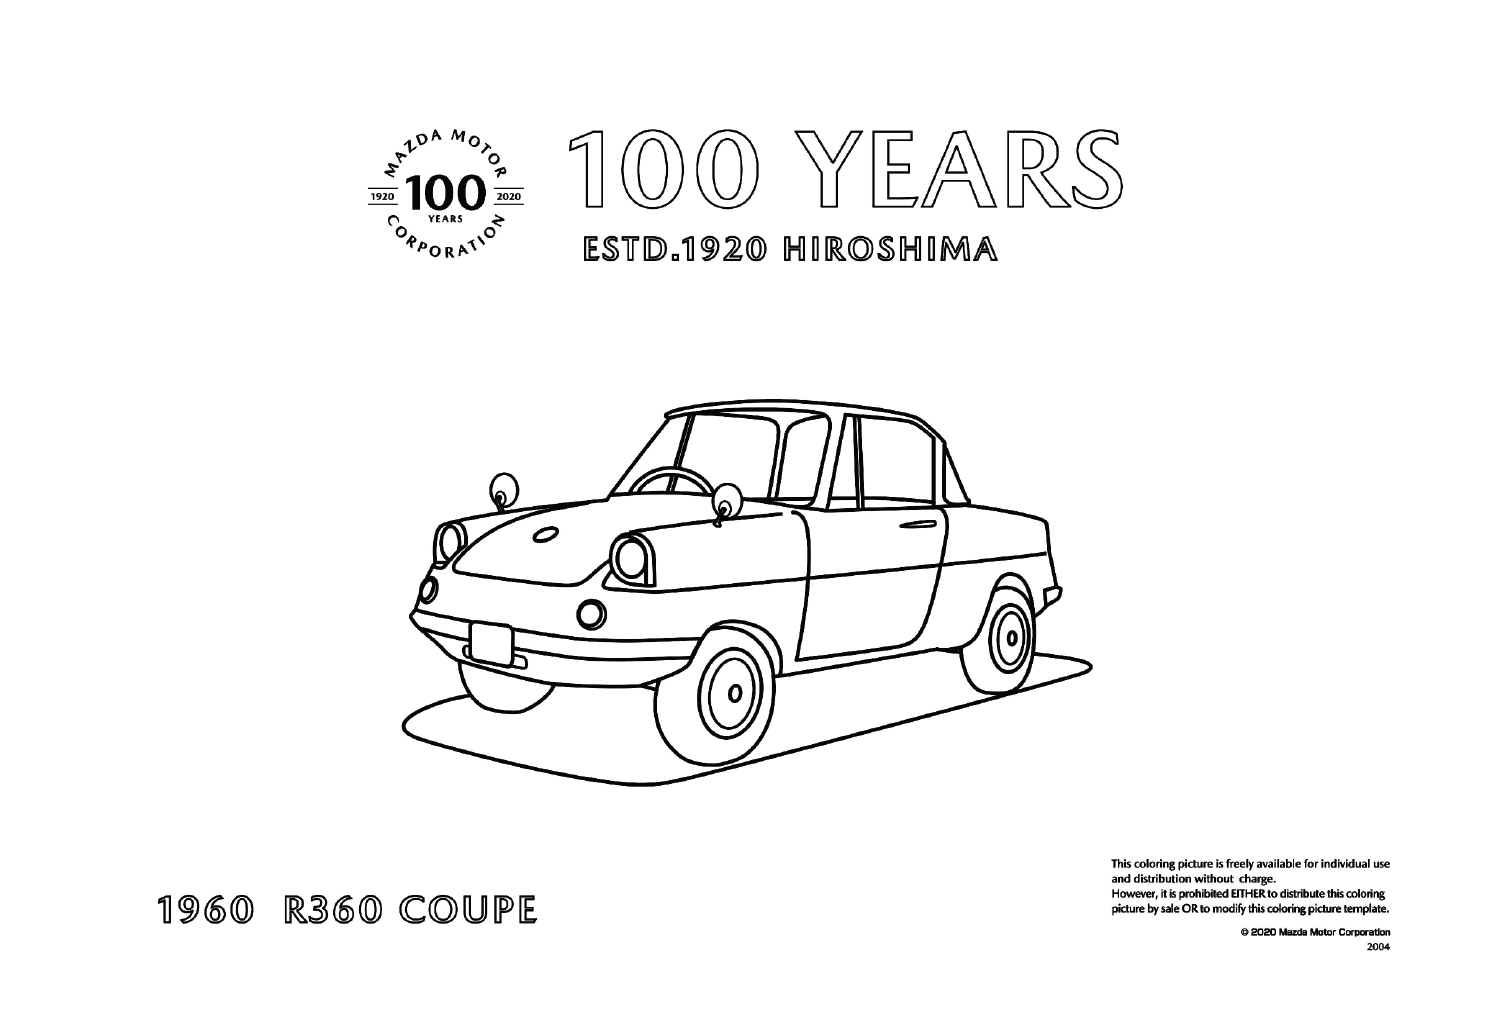 Mazda R360 Coupe Coloring Page Free from Mazda